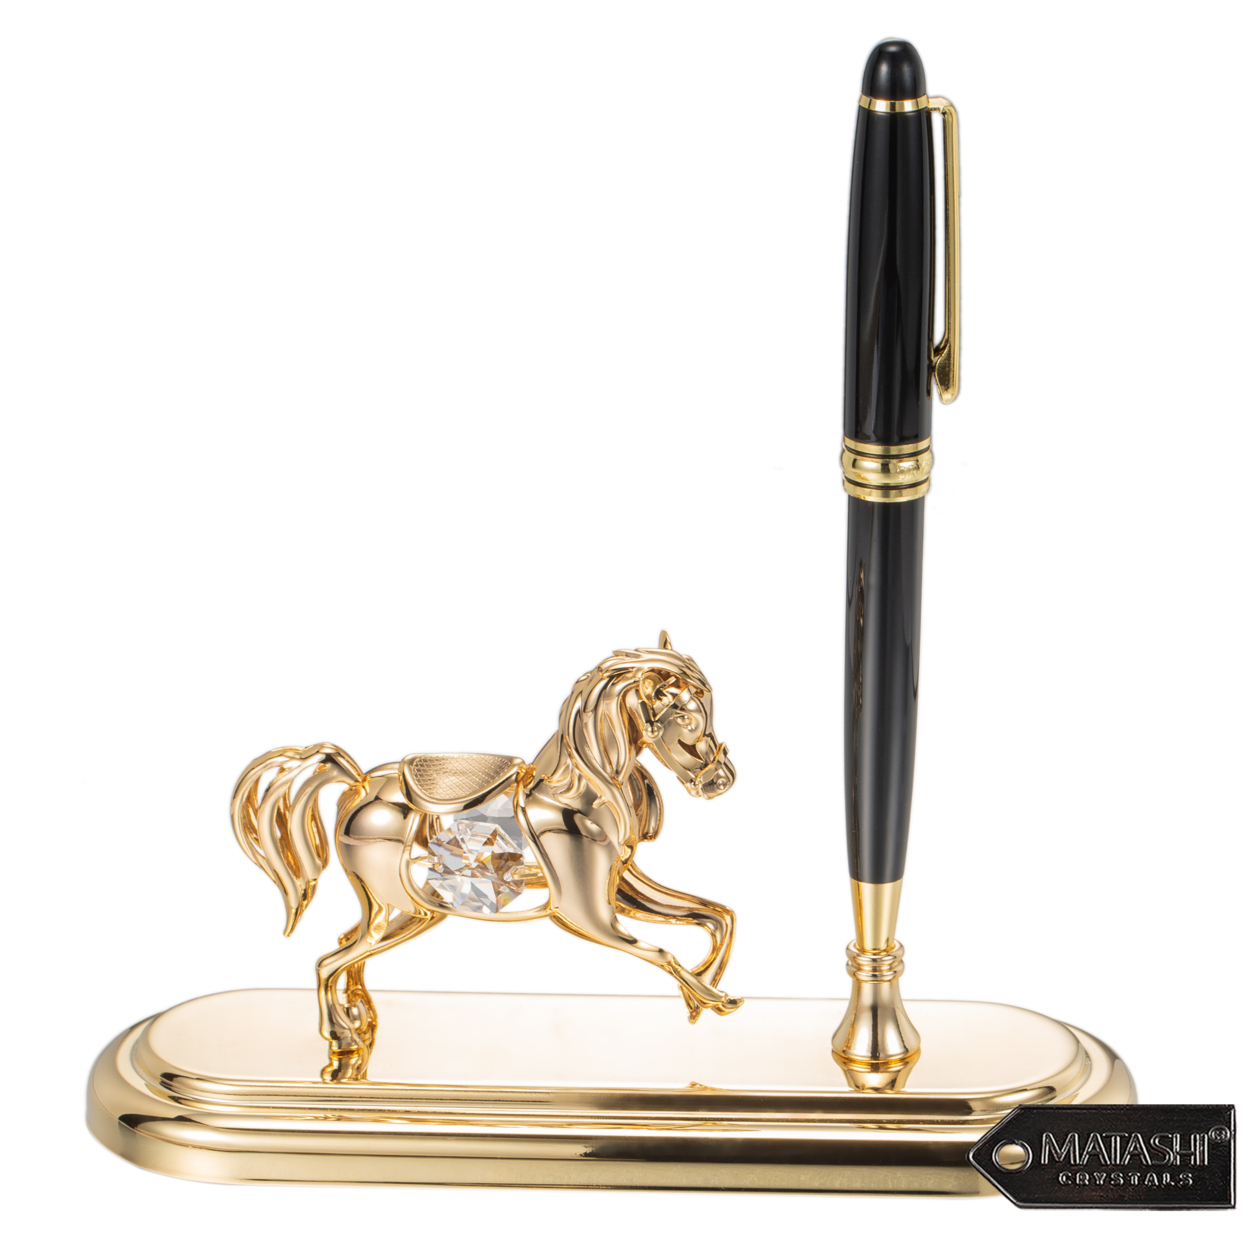 Matashi 24K Gold Plated Executive Desk Set W/ Pen And Horse Ornament Desk Accessories Gift For Christmas Birthday Gift For Dad Boss Teacher